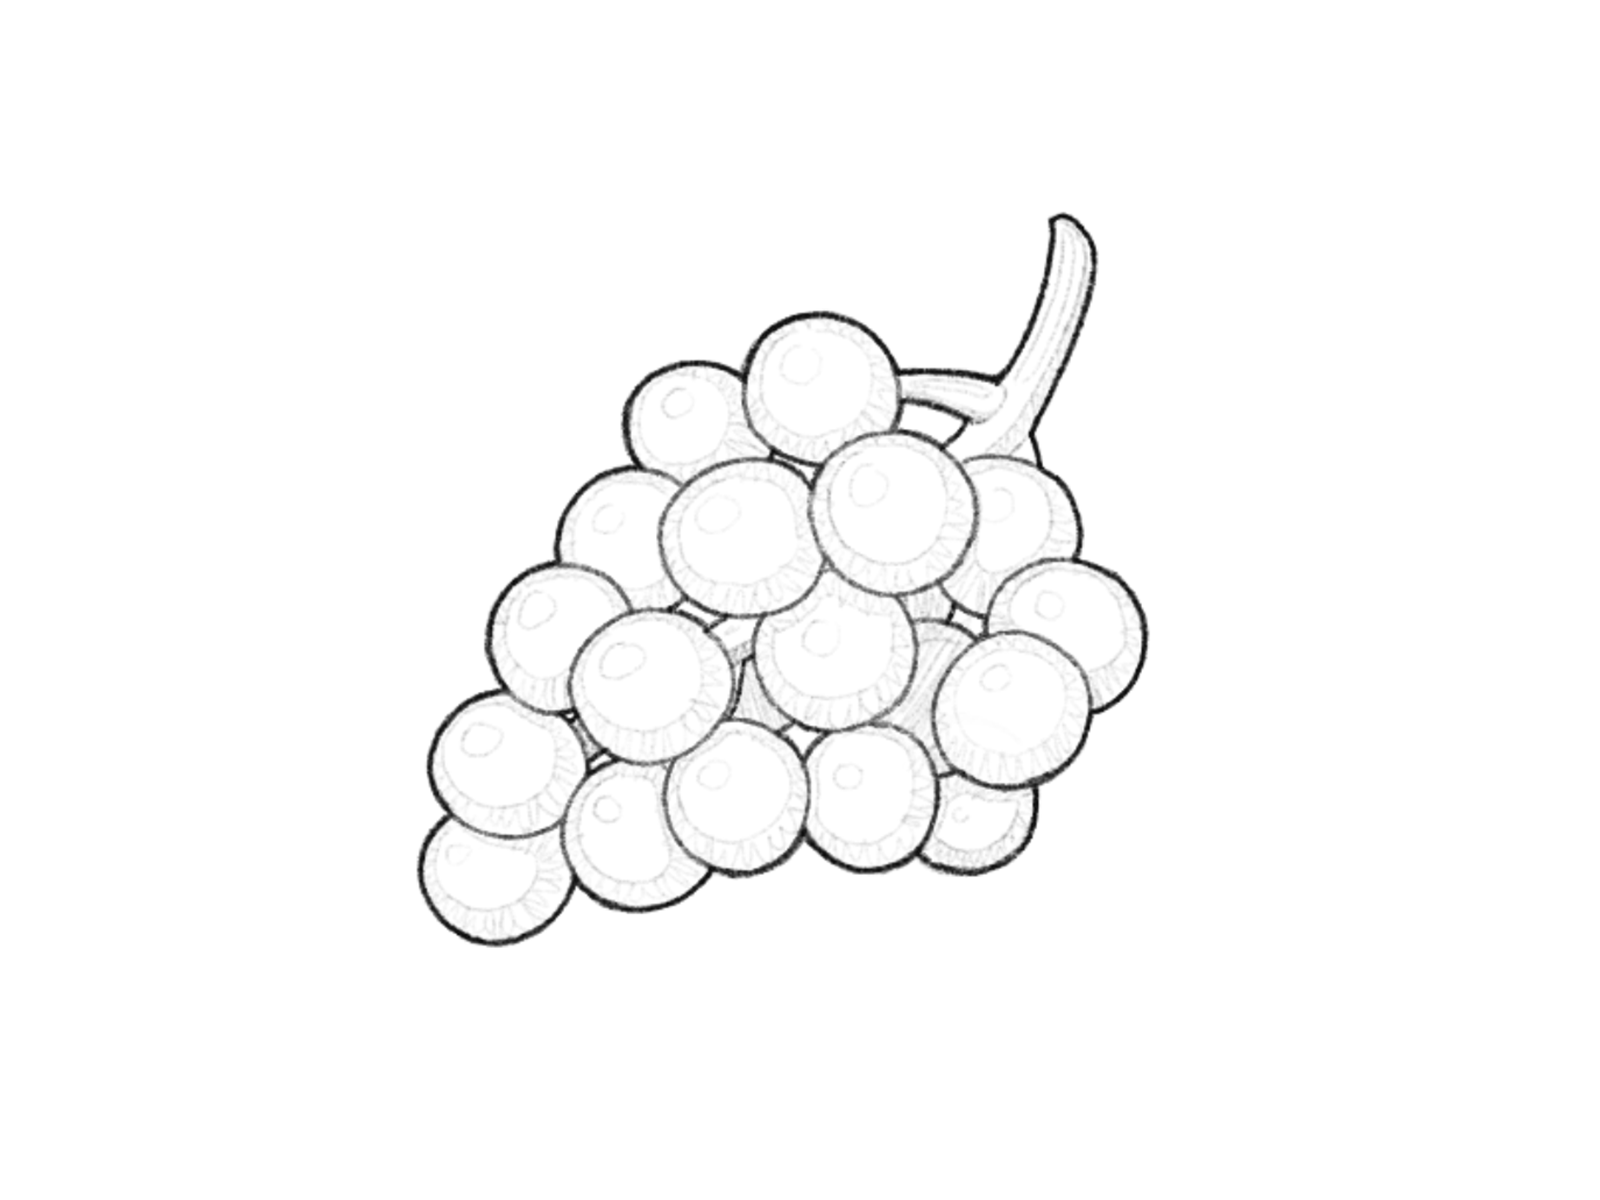 Grapes Drawing Tips and Inspiration for Creating Your Own Grape Art